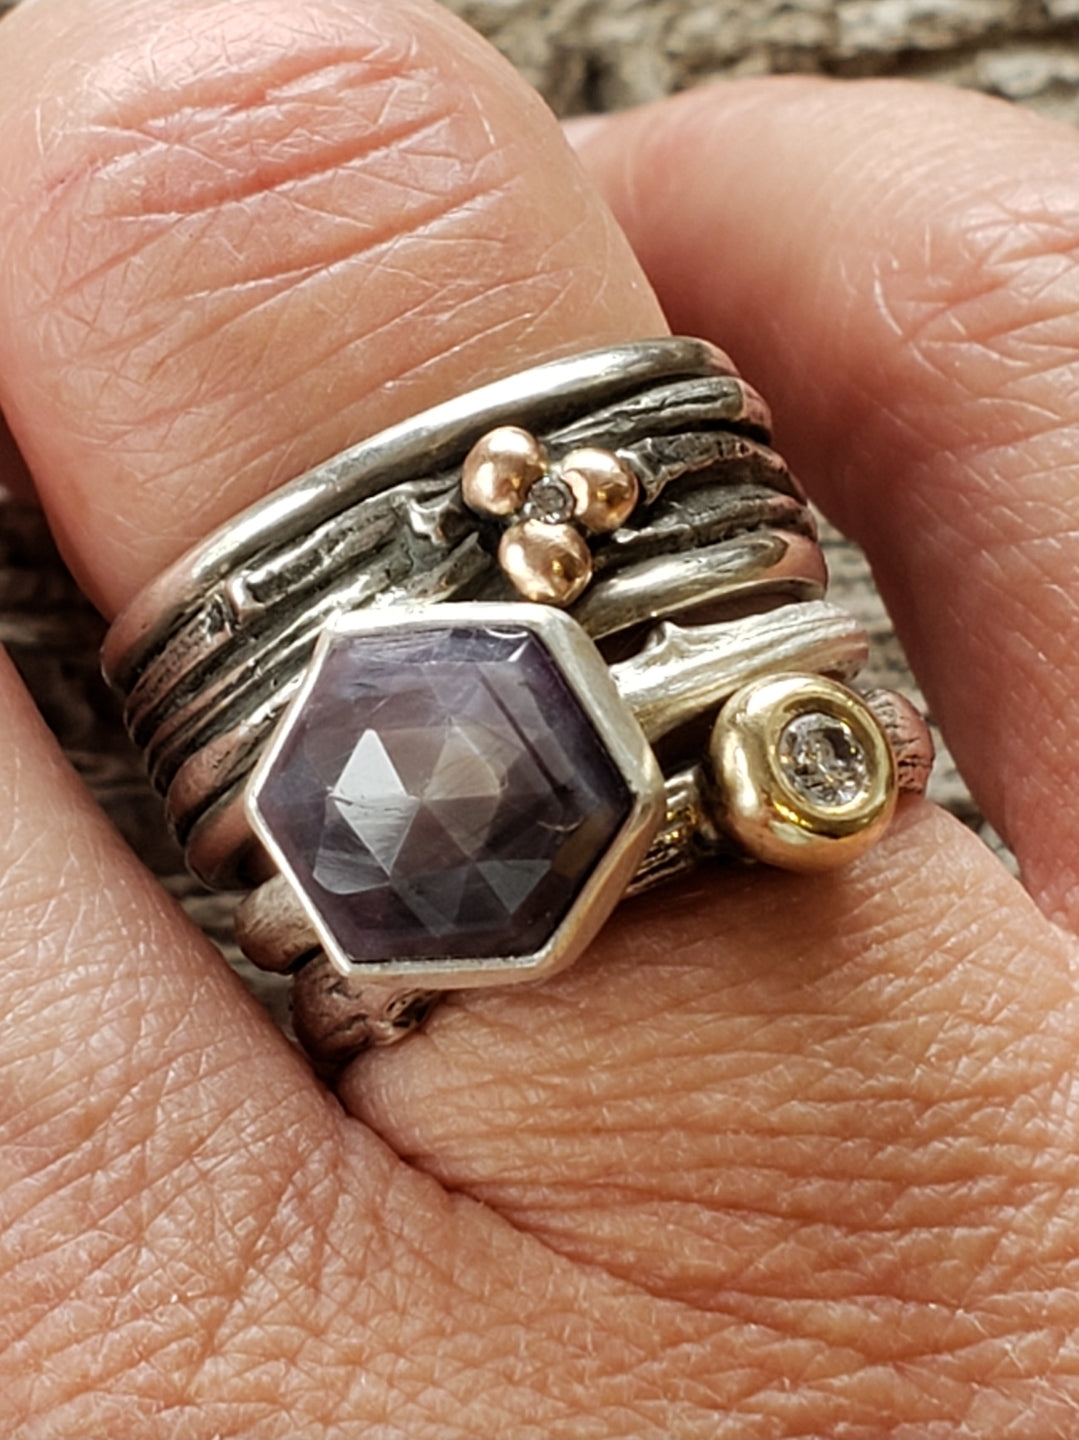 Lavender/gray hexagon Sapphire Twig Ring in Sterling Silver